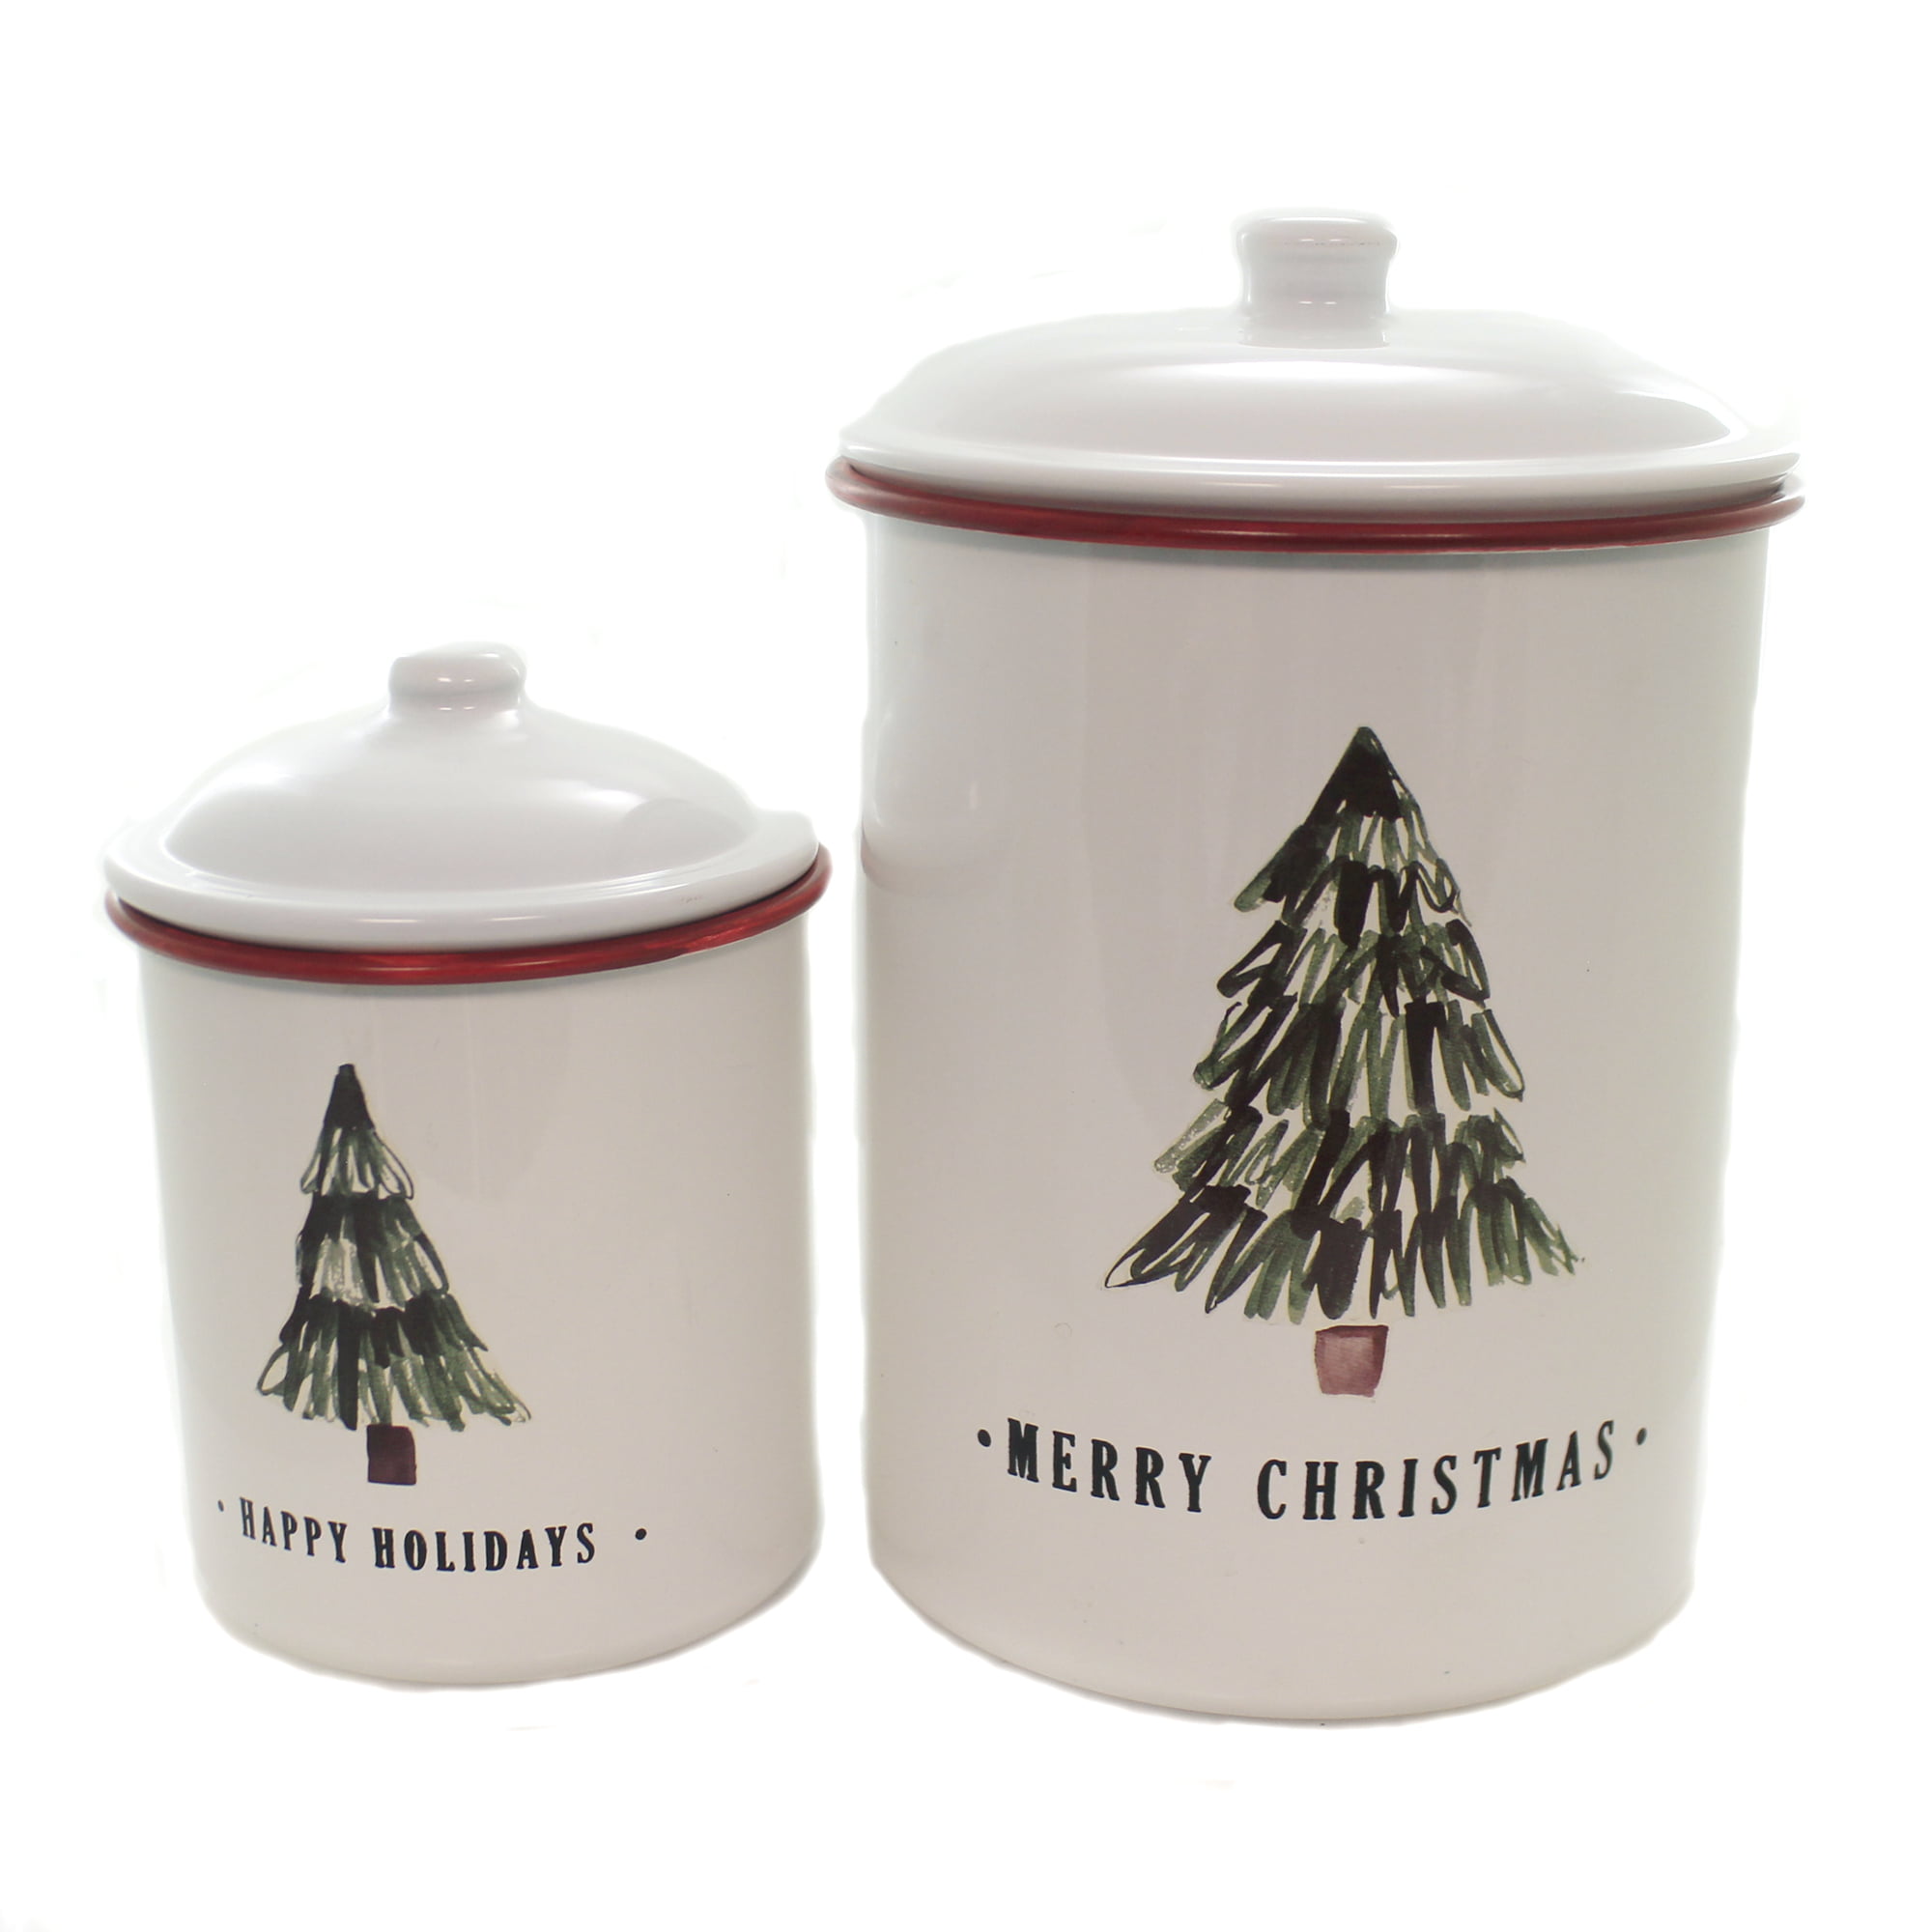 Christmas RED & WHITE TREE ENAMEL CANISTER SET Decorative Use Only ...